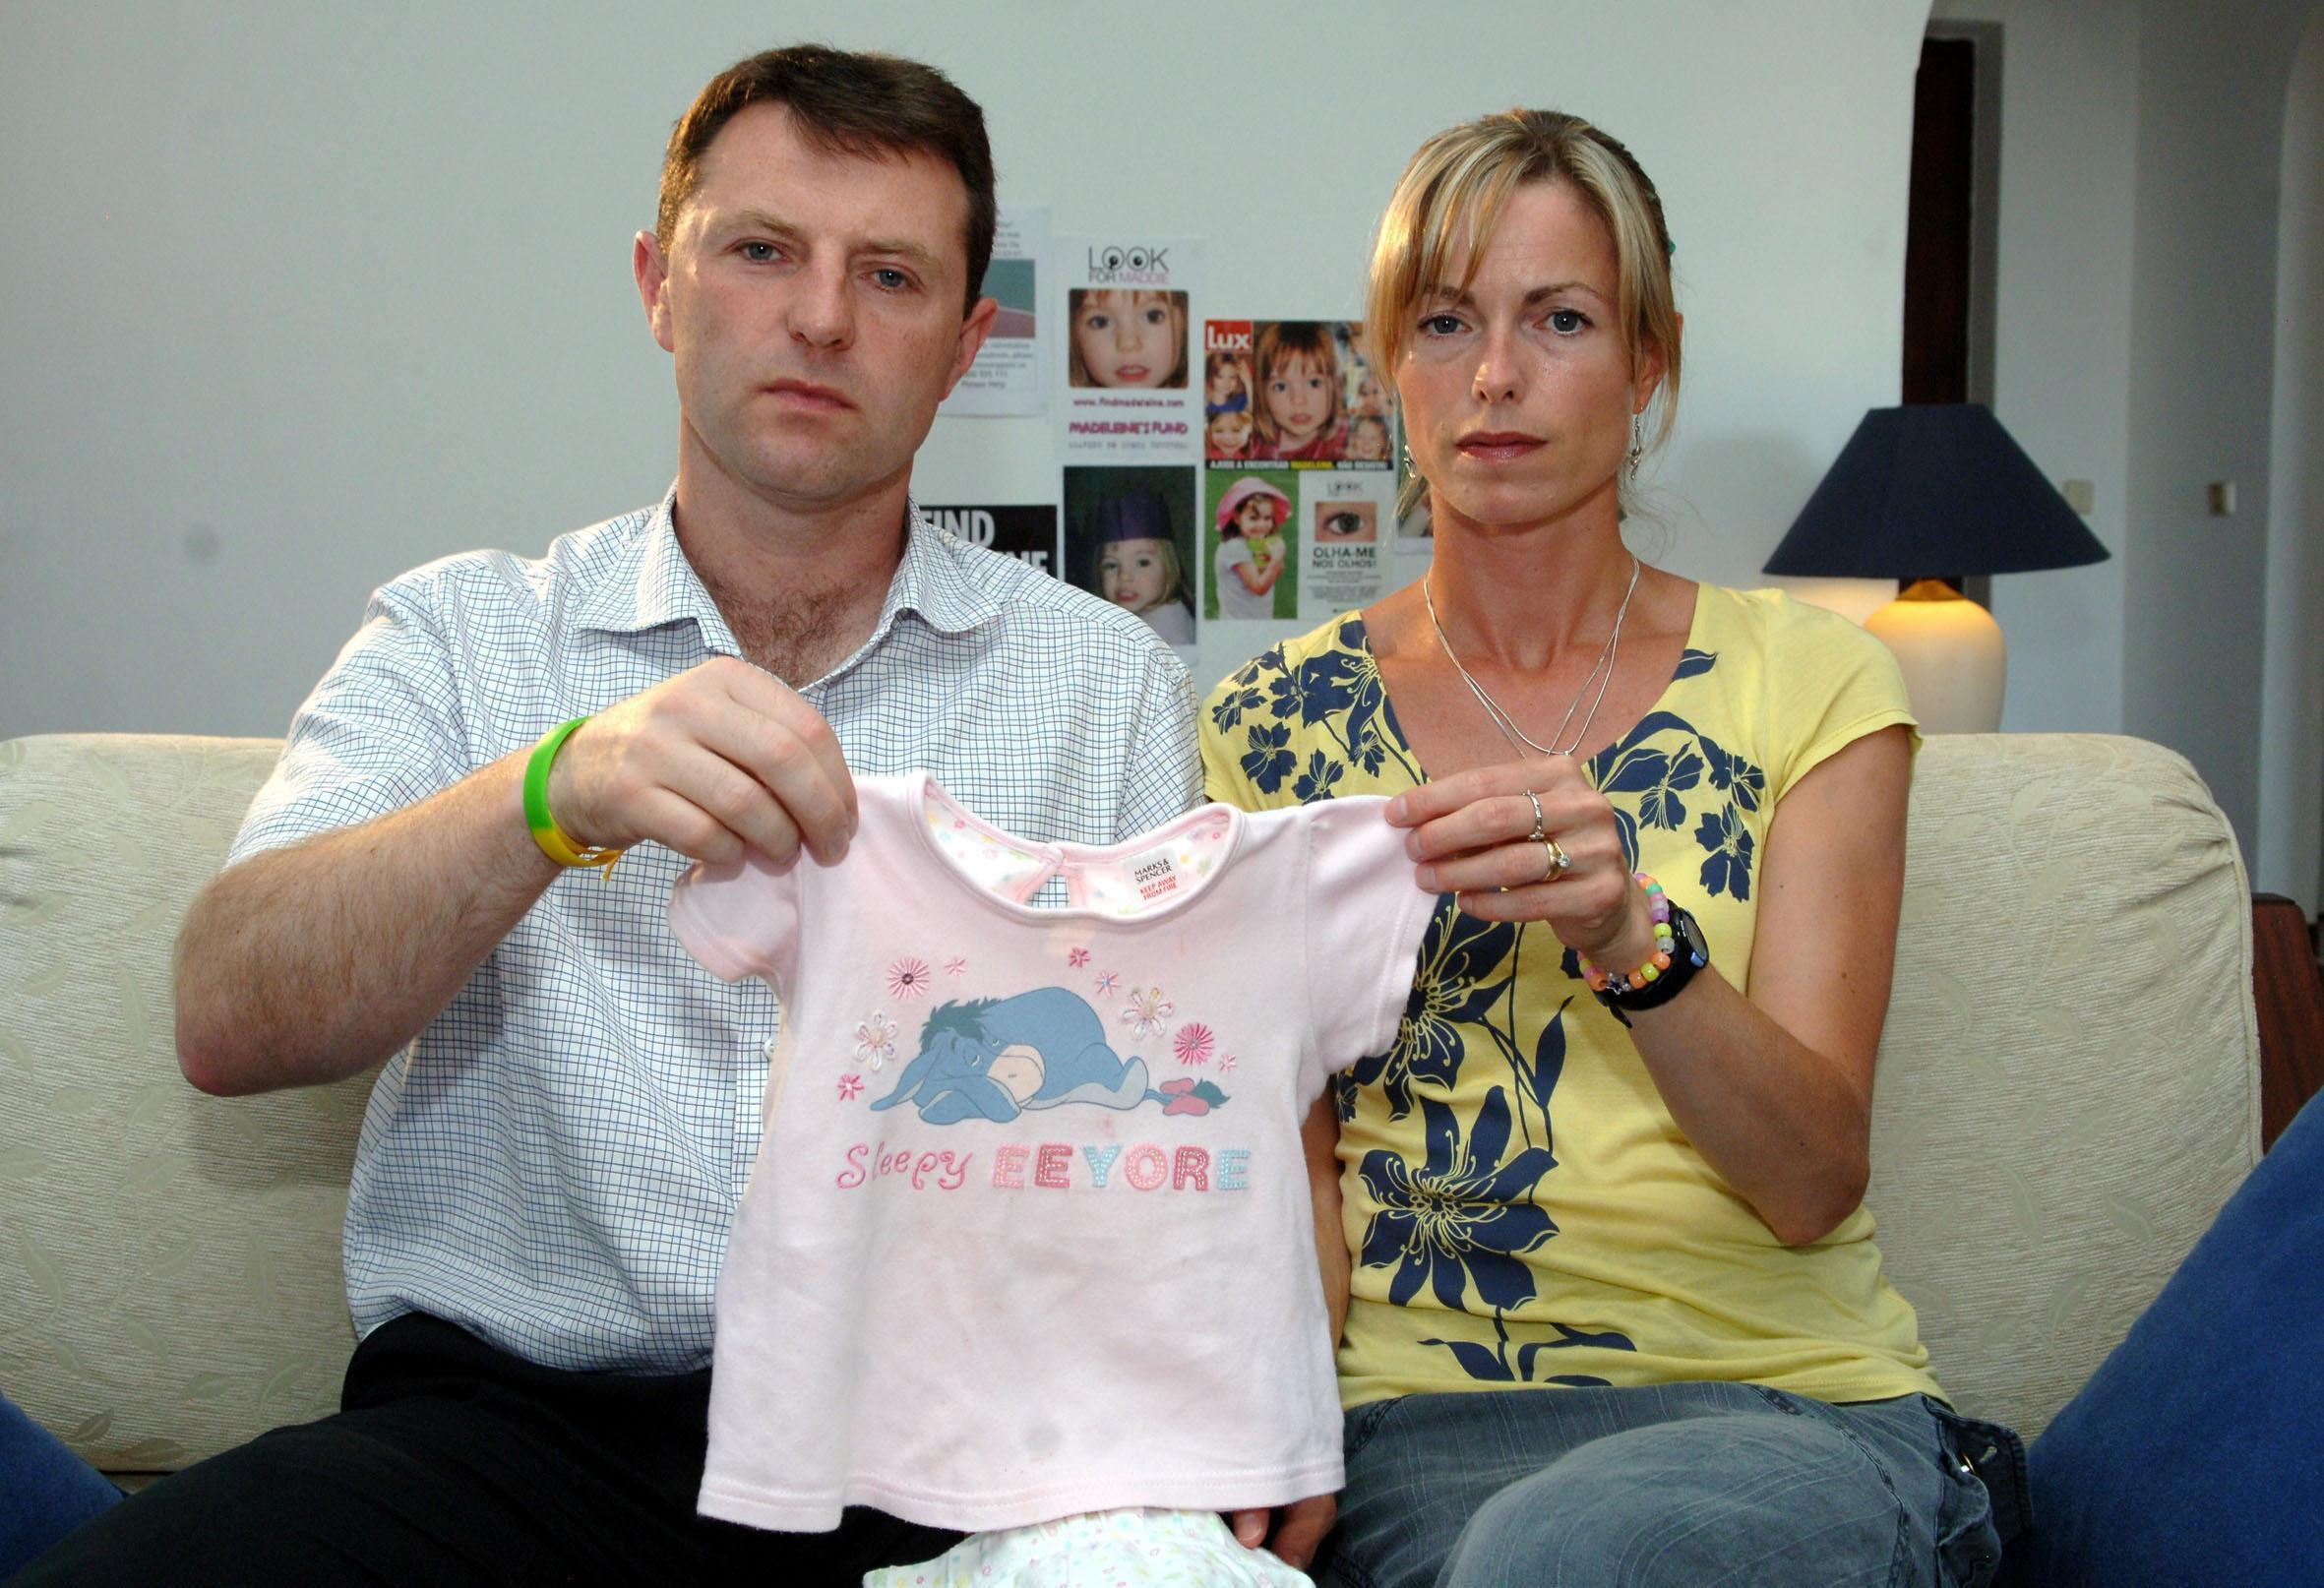 File photo dated 04/06/07 of Kate and Gerry McCann holding pyamas belonging to their daughter Amelie which are similar to the ones worn by daughter Madeleine on the night she went missing as they make an appeal for the BBC's Crimewatch programe, in Praia Da Luz, Portugal. A German prisoner has been identified as a suspect in the disappearance of Madeleine, detectives have revealed. The Metropolitan Police have not named the man, 43, who is described as white with short blond hair, possibly fair, and about 6ft tall with a slim build.,Image: 526691870, License: Rights-managed, Restrictions: FILE PHOTO, Model Release: no, Credit line: Steve Parsons / PA Images / Profimedia